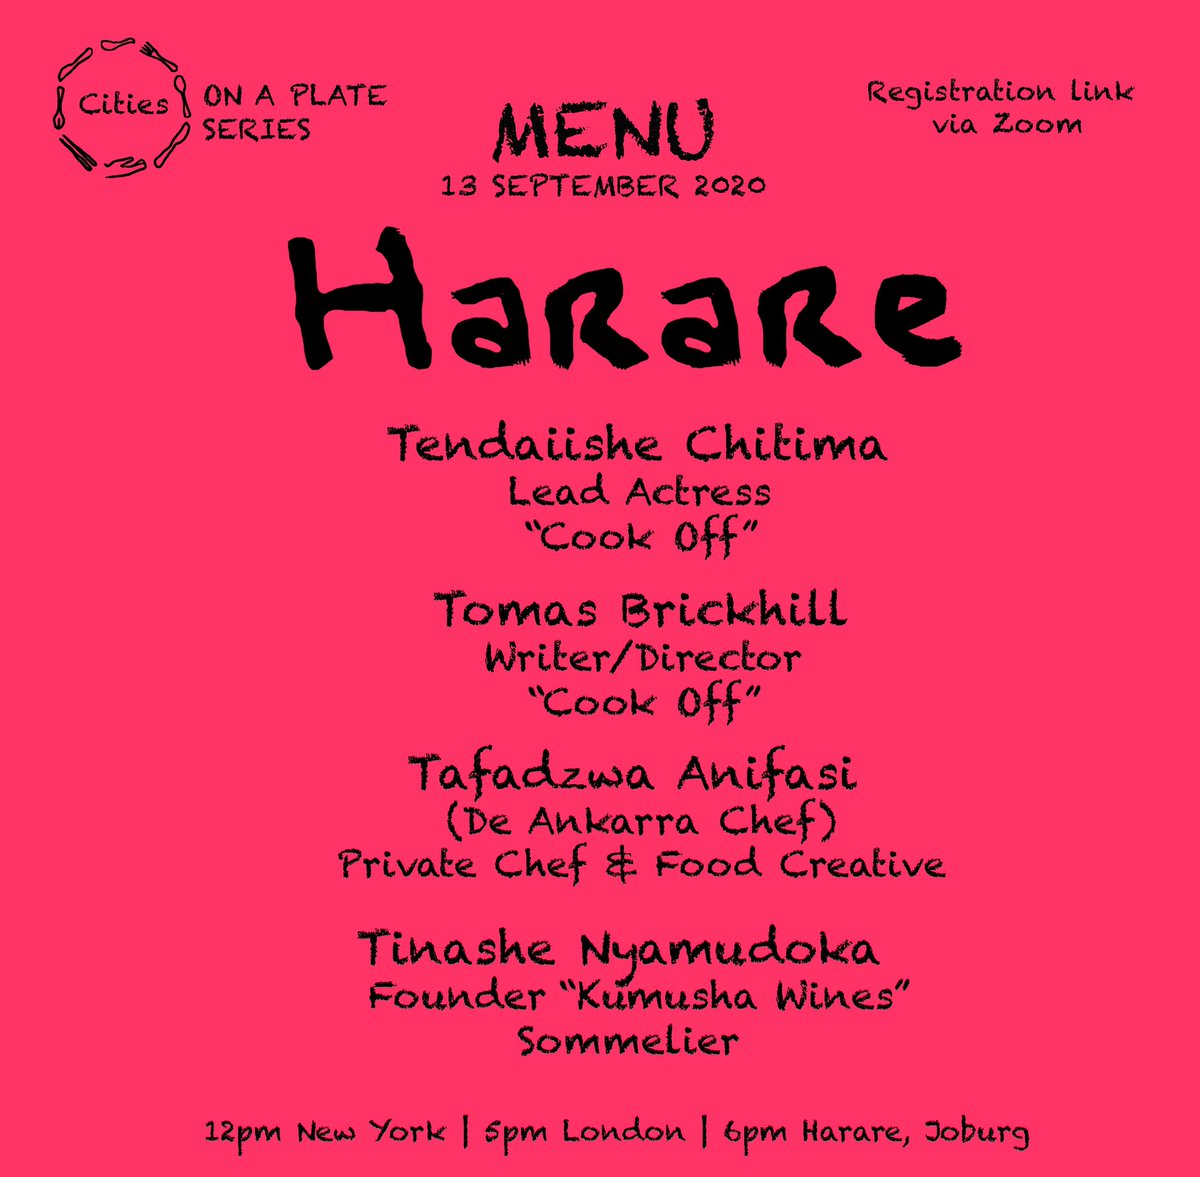 Our menu for Sept 13th is out! 💥 @Tendai_Chitima and @TomasLutuli from @CookOffZim on @netflix; @tafiqq with a delicious #dessert demo; @tnashenyamudoka founder of #KumushaWines! #harareonaplate #AfricaonNetflix #zimbabwe #recipes  #flavour #eatlocal #foodies #wine #sommelier